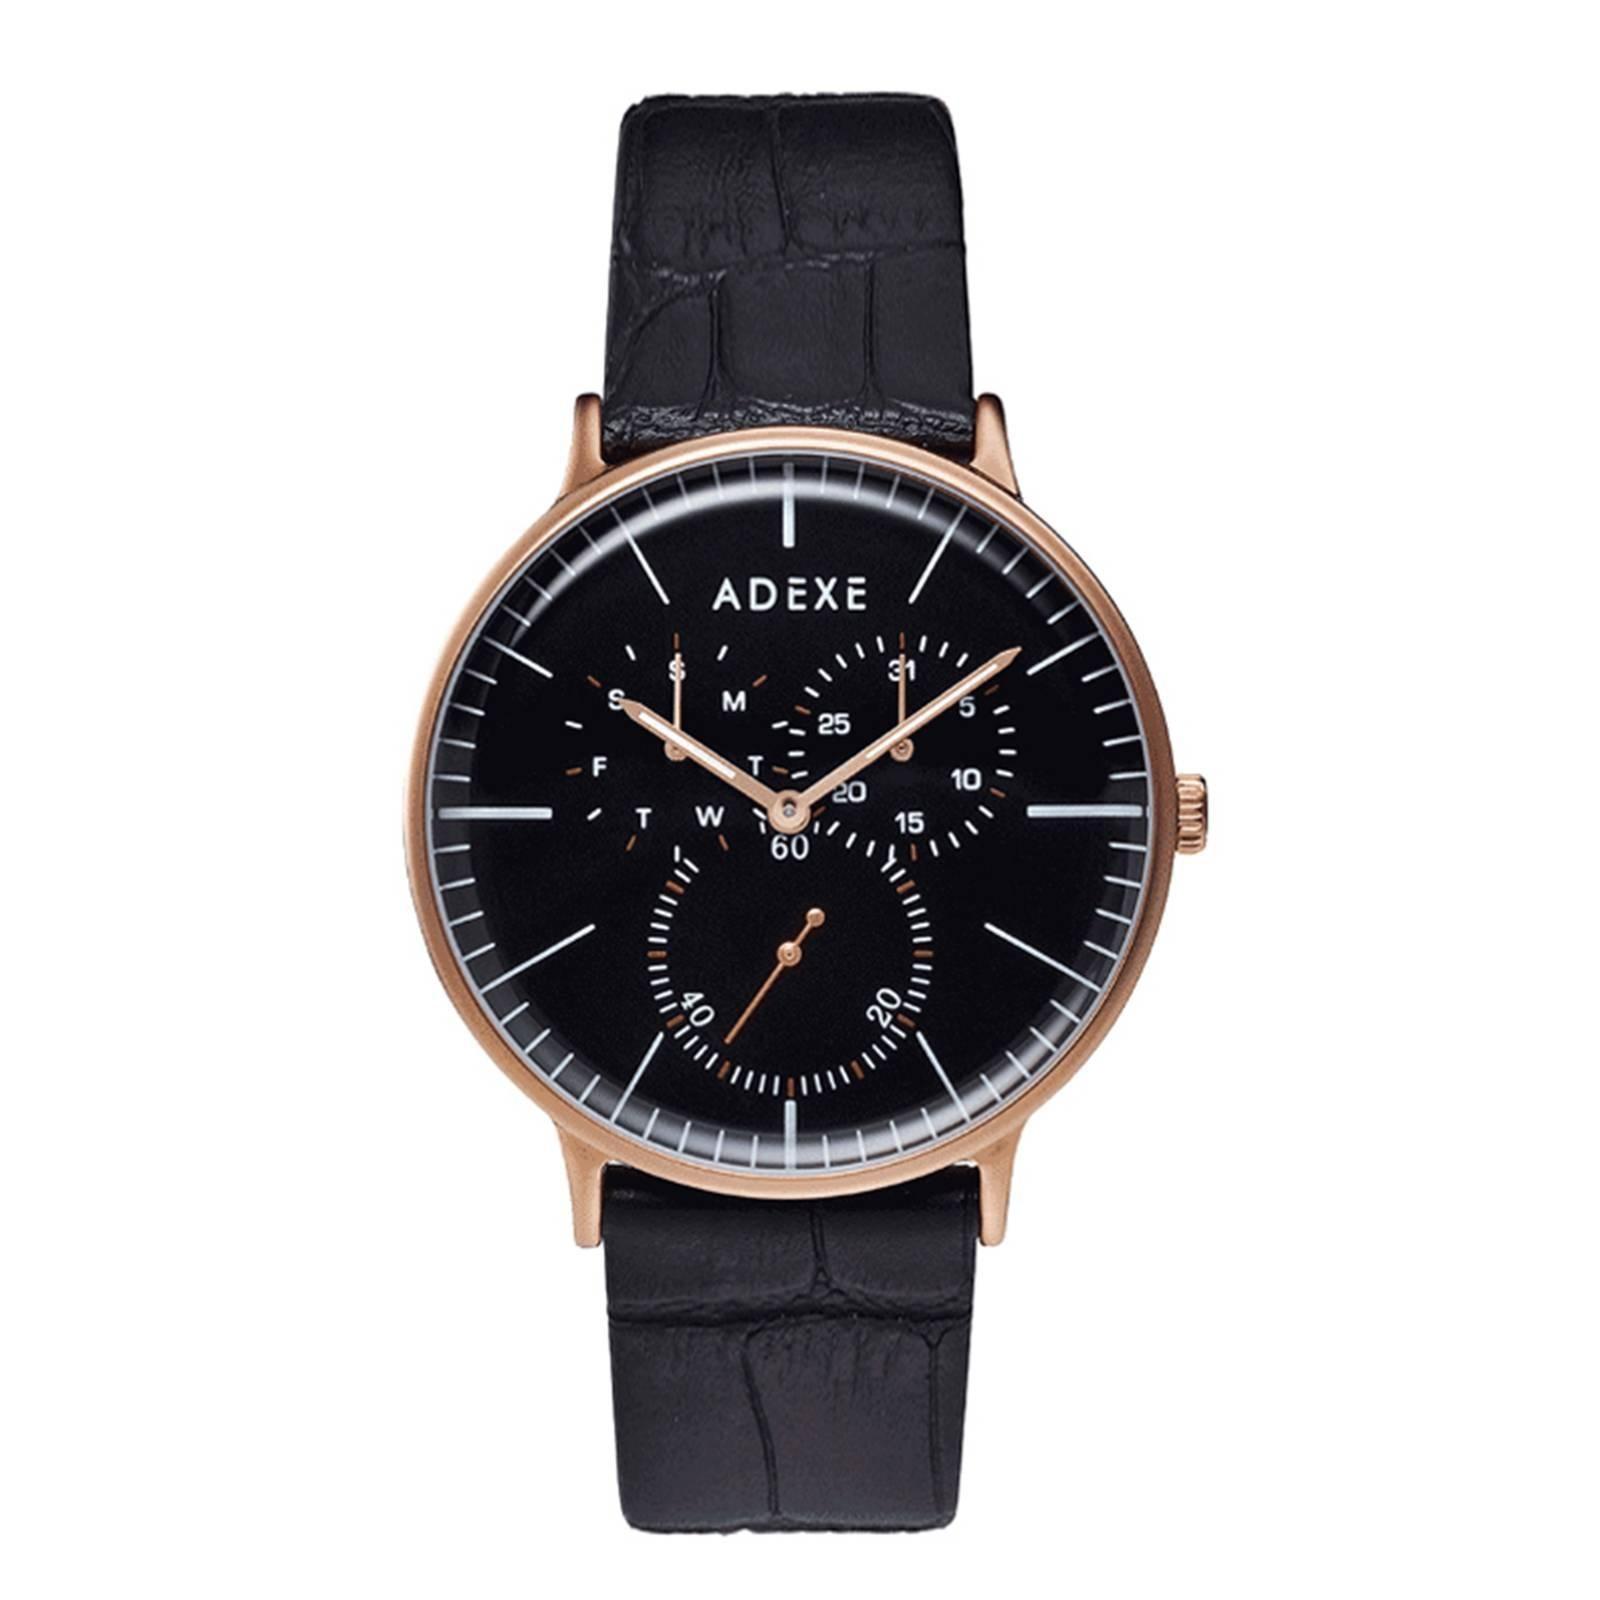  ADEXE Watch THEY Rose gold and Black Elegant Quartz Watch Gift for Him and Her For Sale